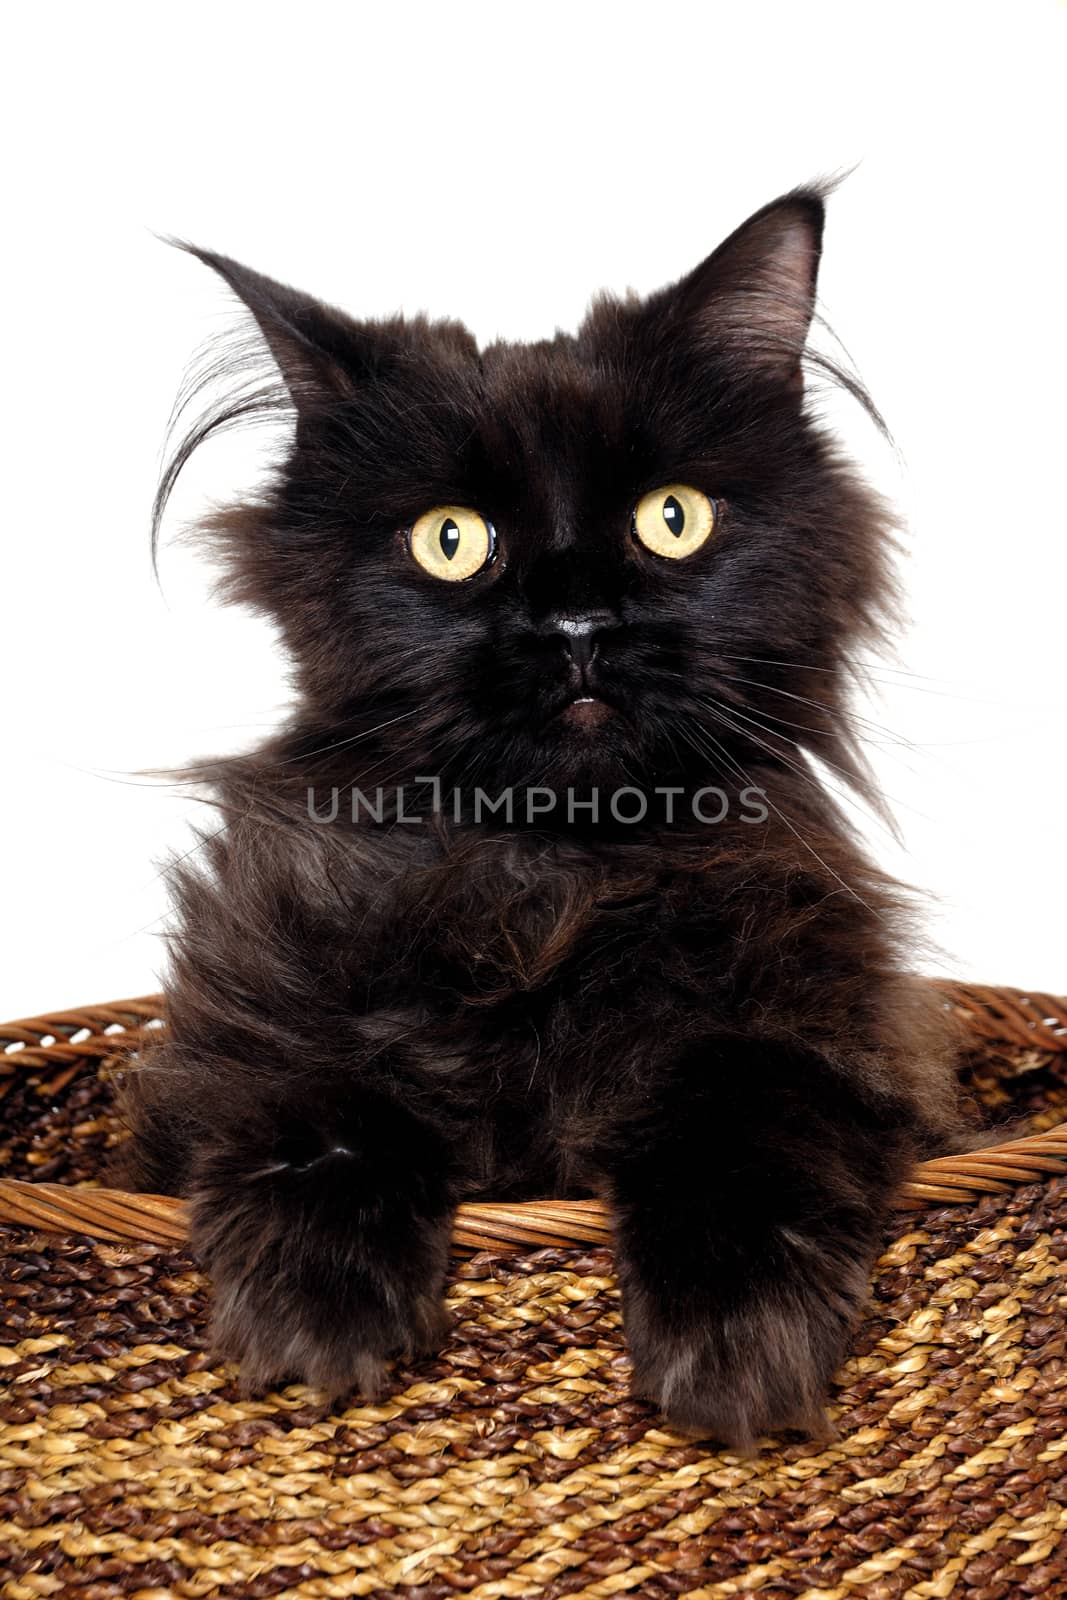 Sweet black cat is sitting in a basket on a white background